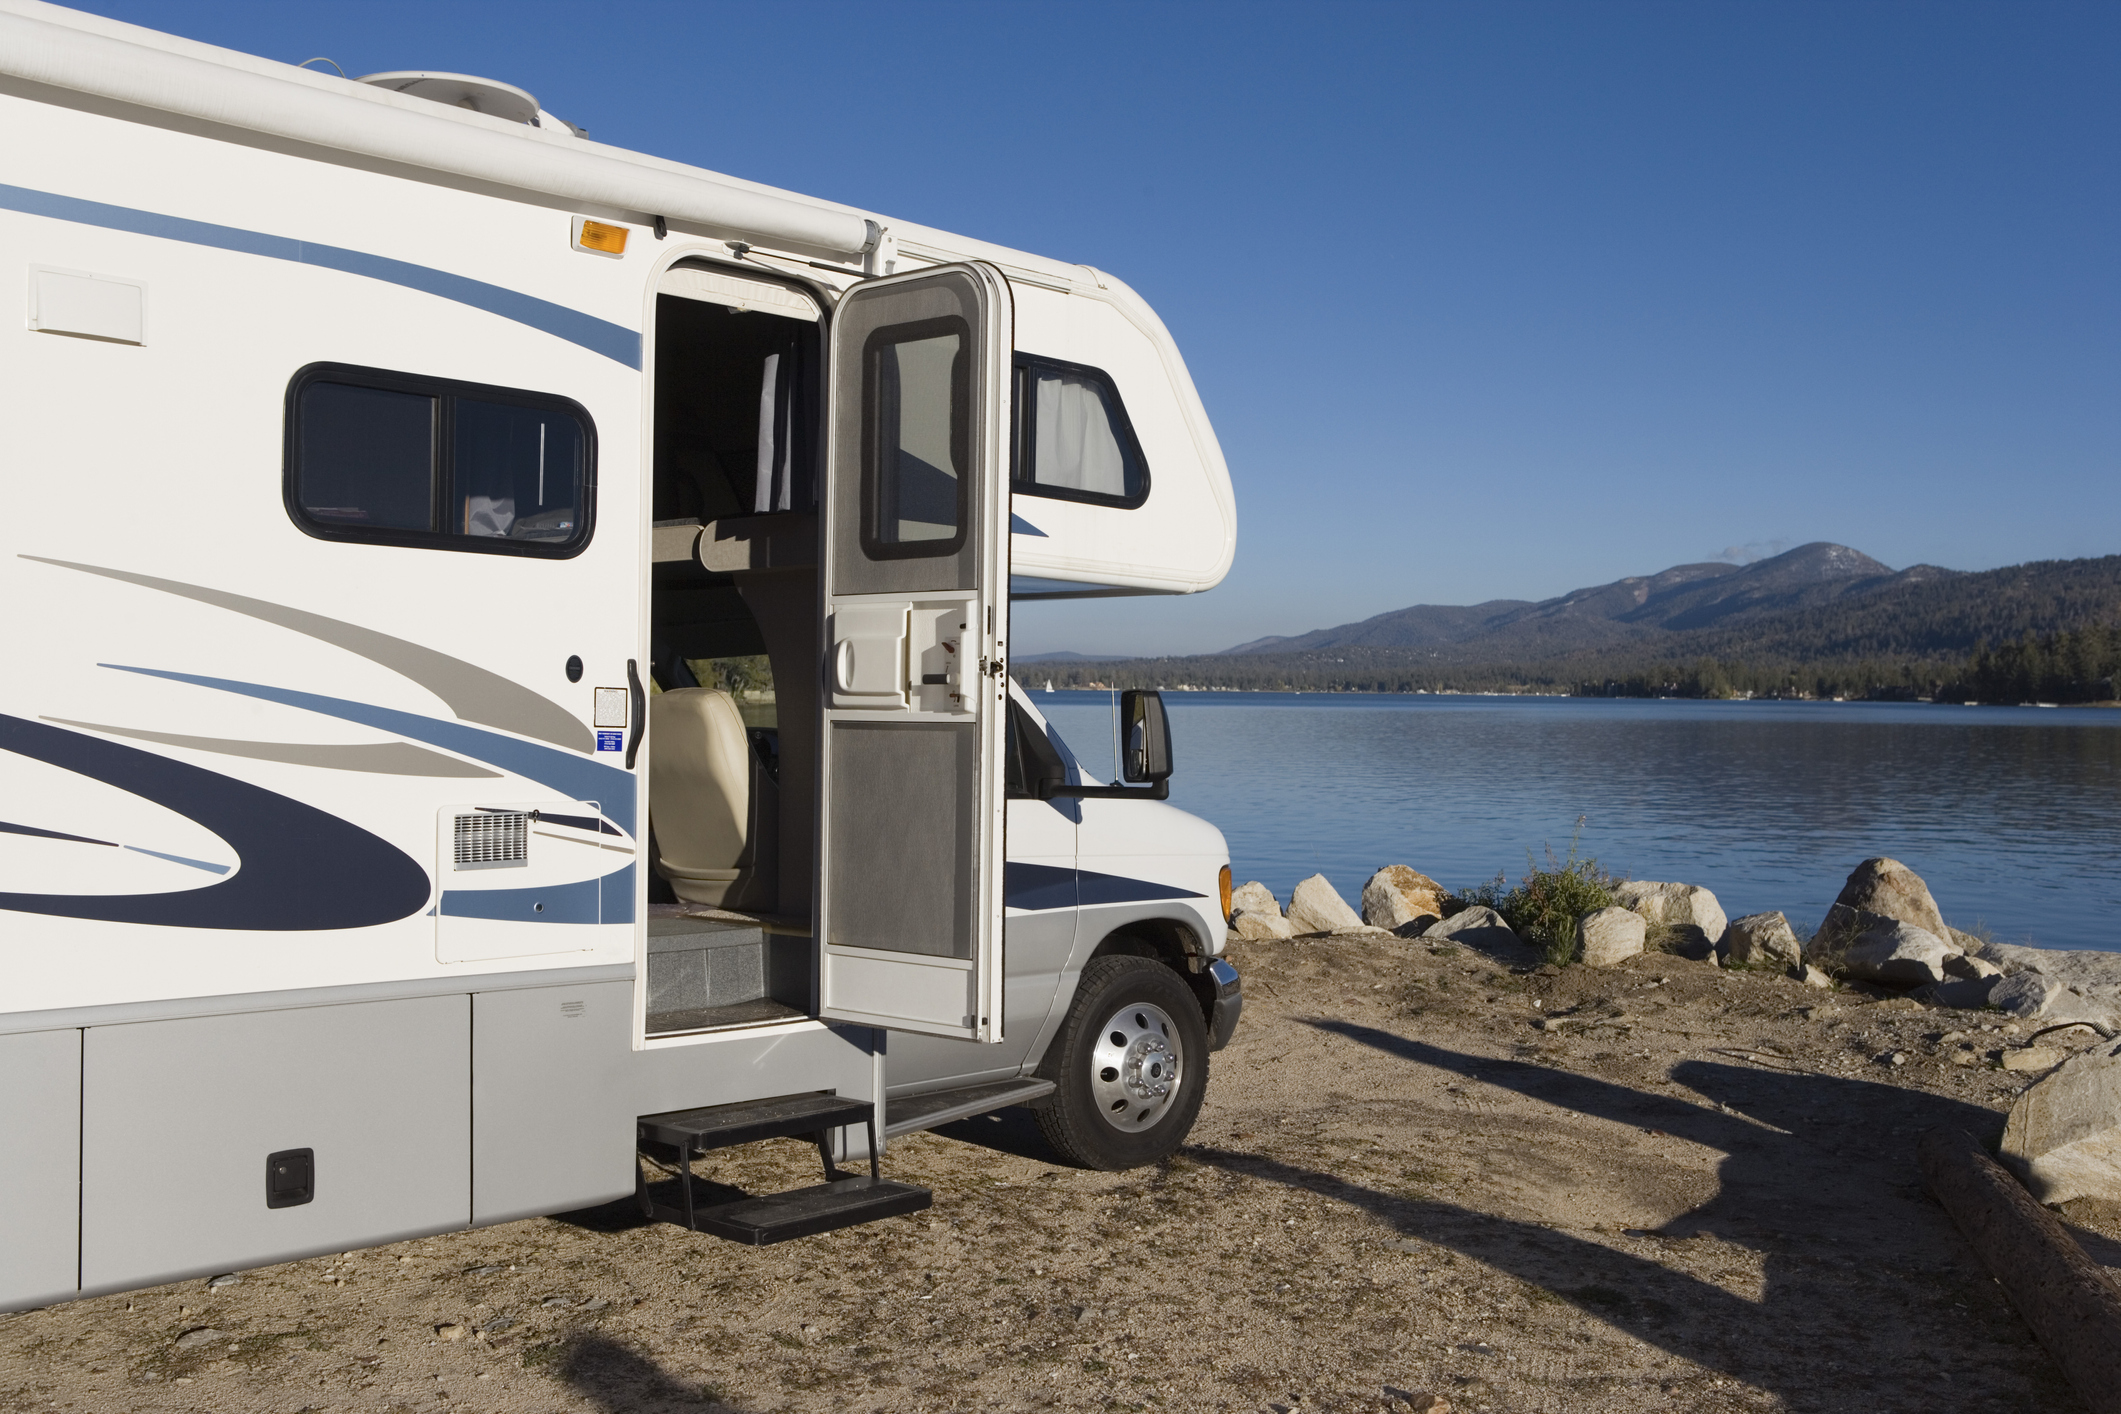 Beginner RV owners — RV camped on the shore of a scenic lake.